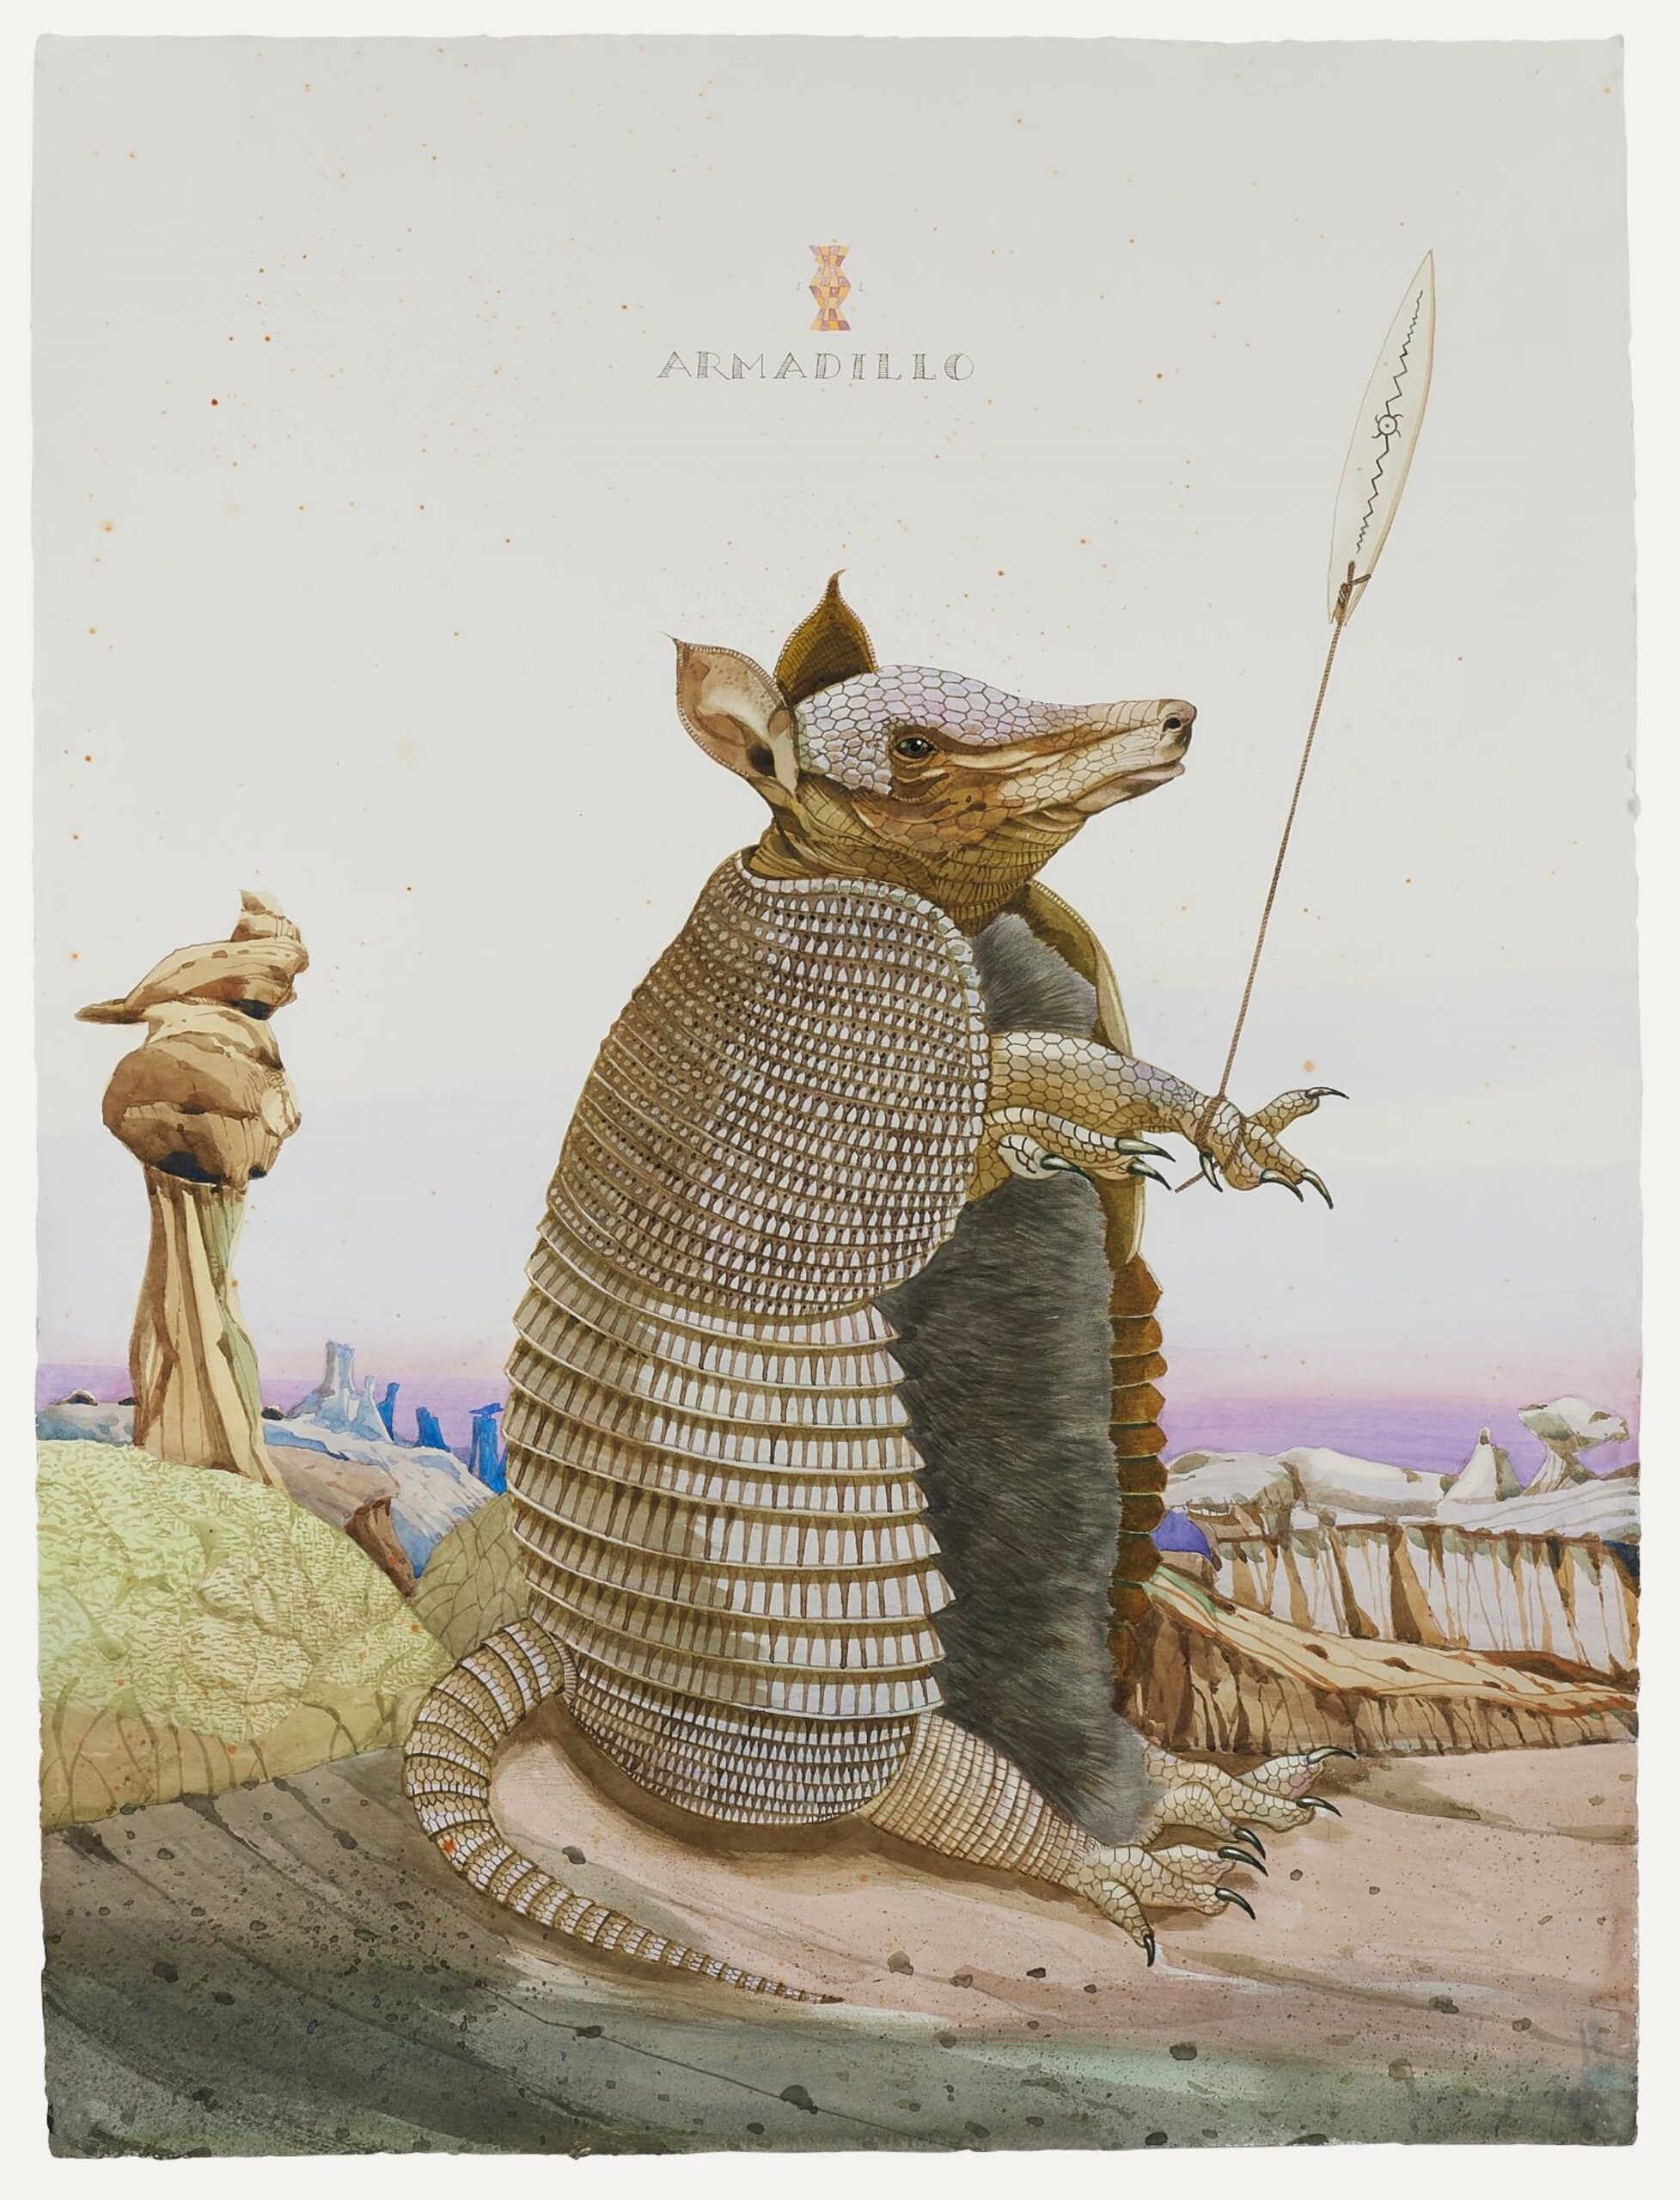 
		                					Scott Kelley		                																	
																											<i>Armadilli - The Ah-Shi-Sle-Pah Orchestra,</i>  
																																																					watercolor, gouache and graphite on paper, 
																																								40 x 30 inches 
																								
		                				